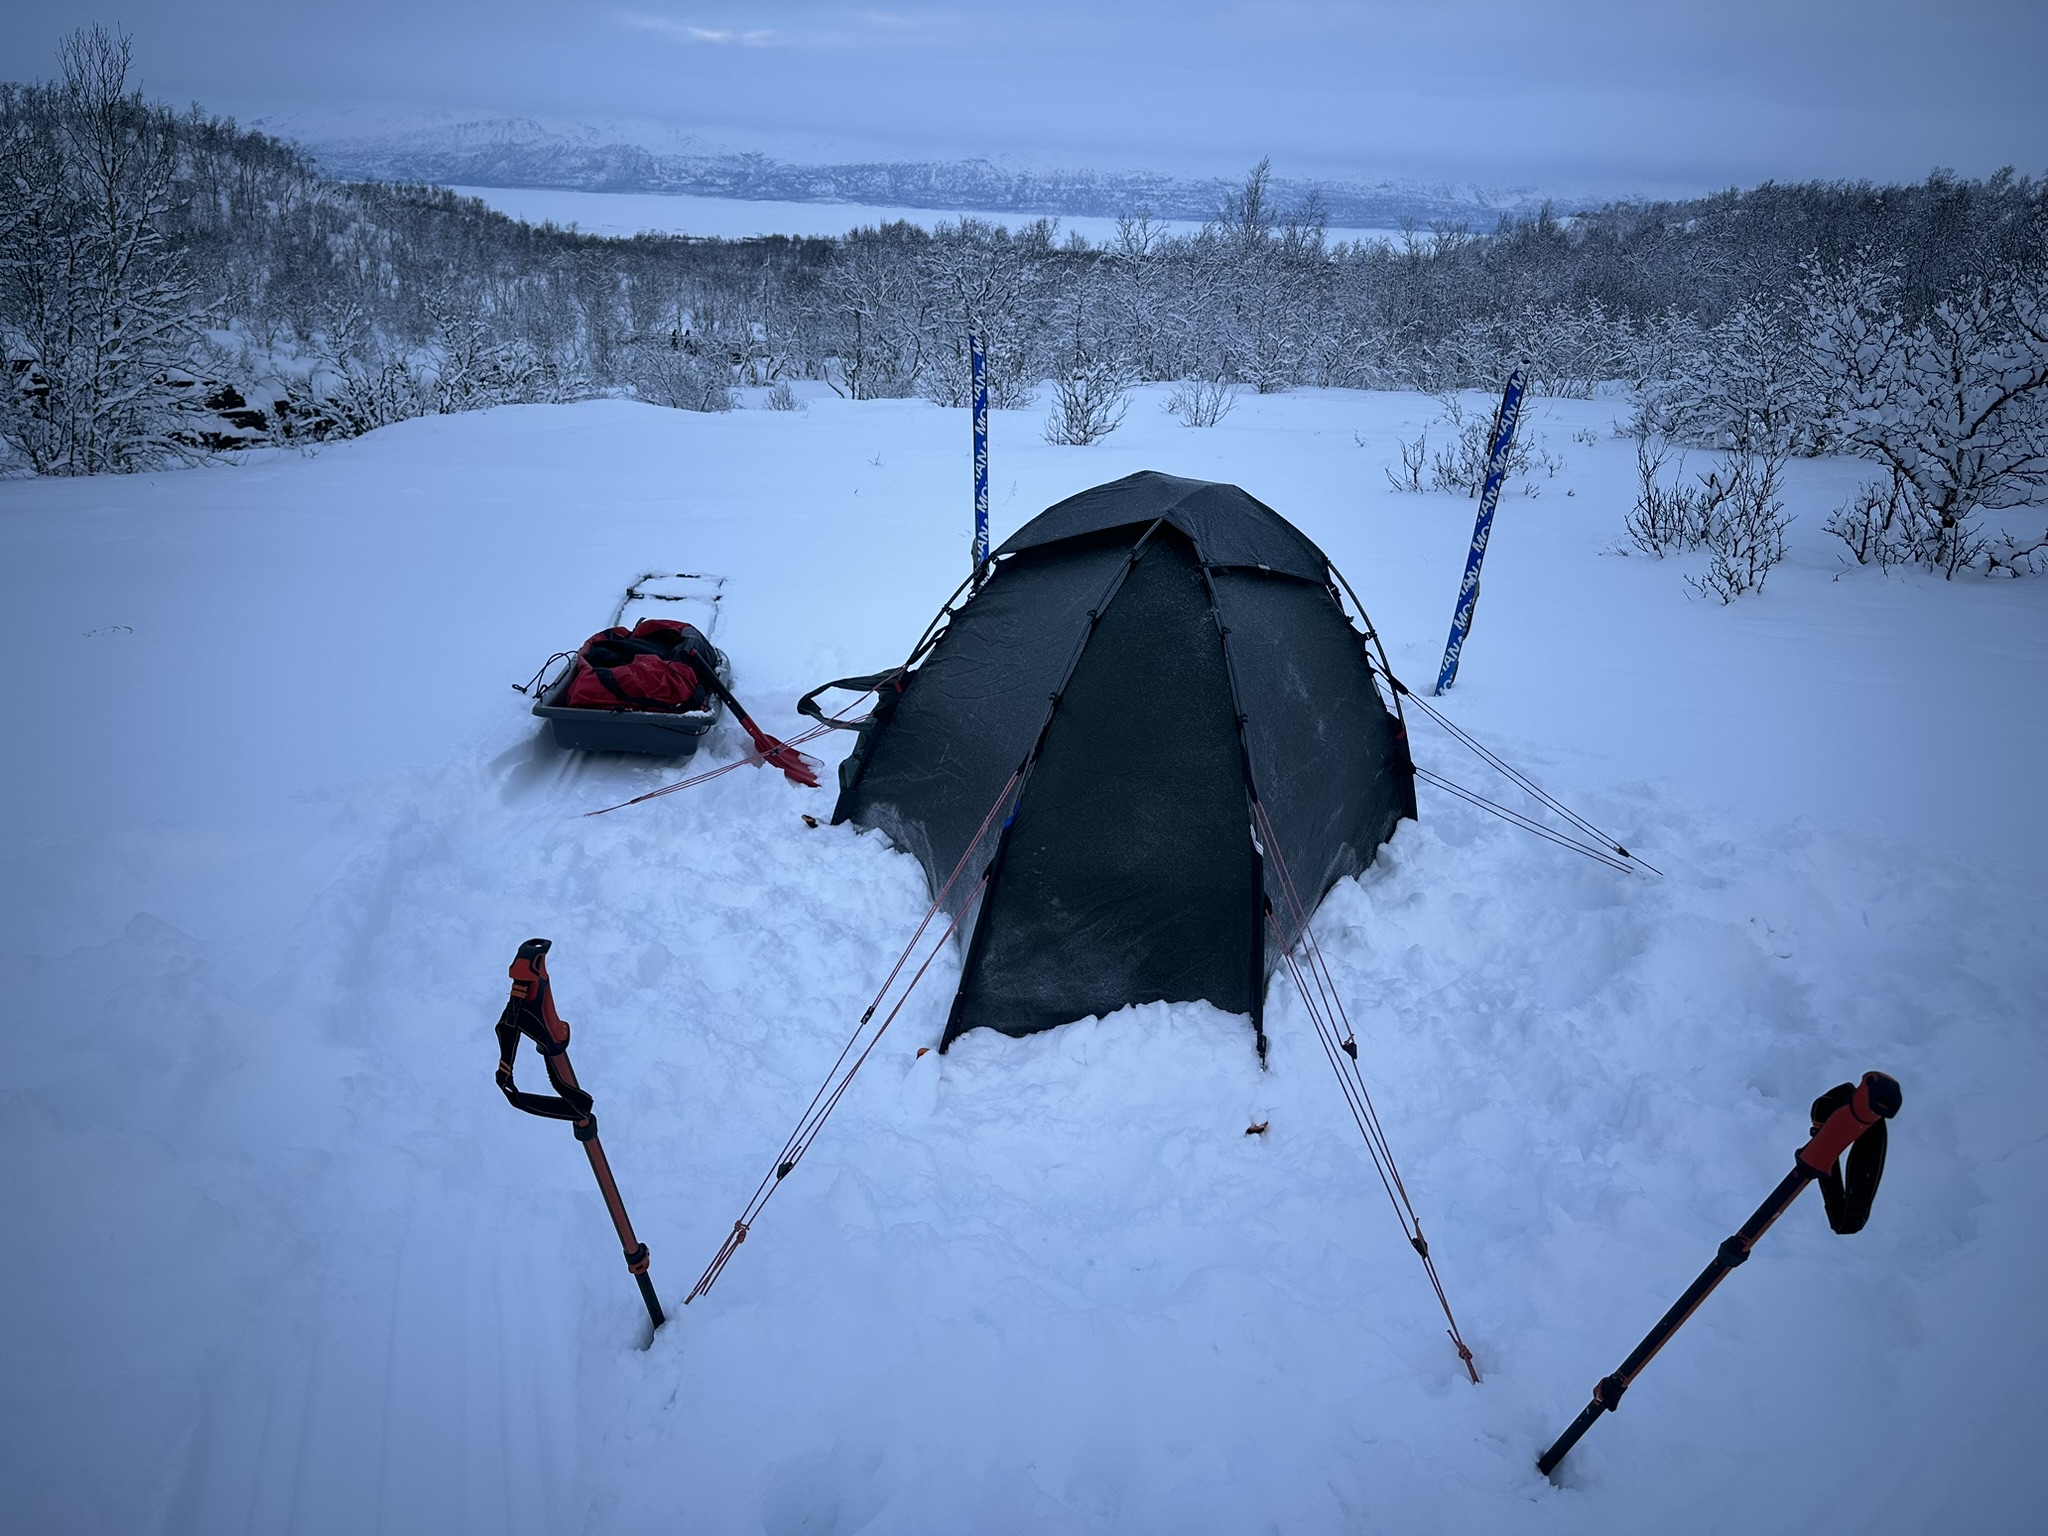 Putting the tent up in the snow